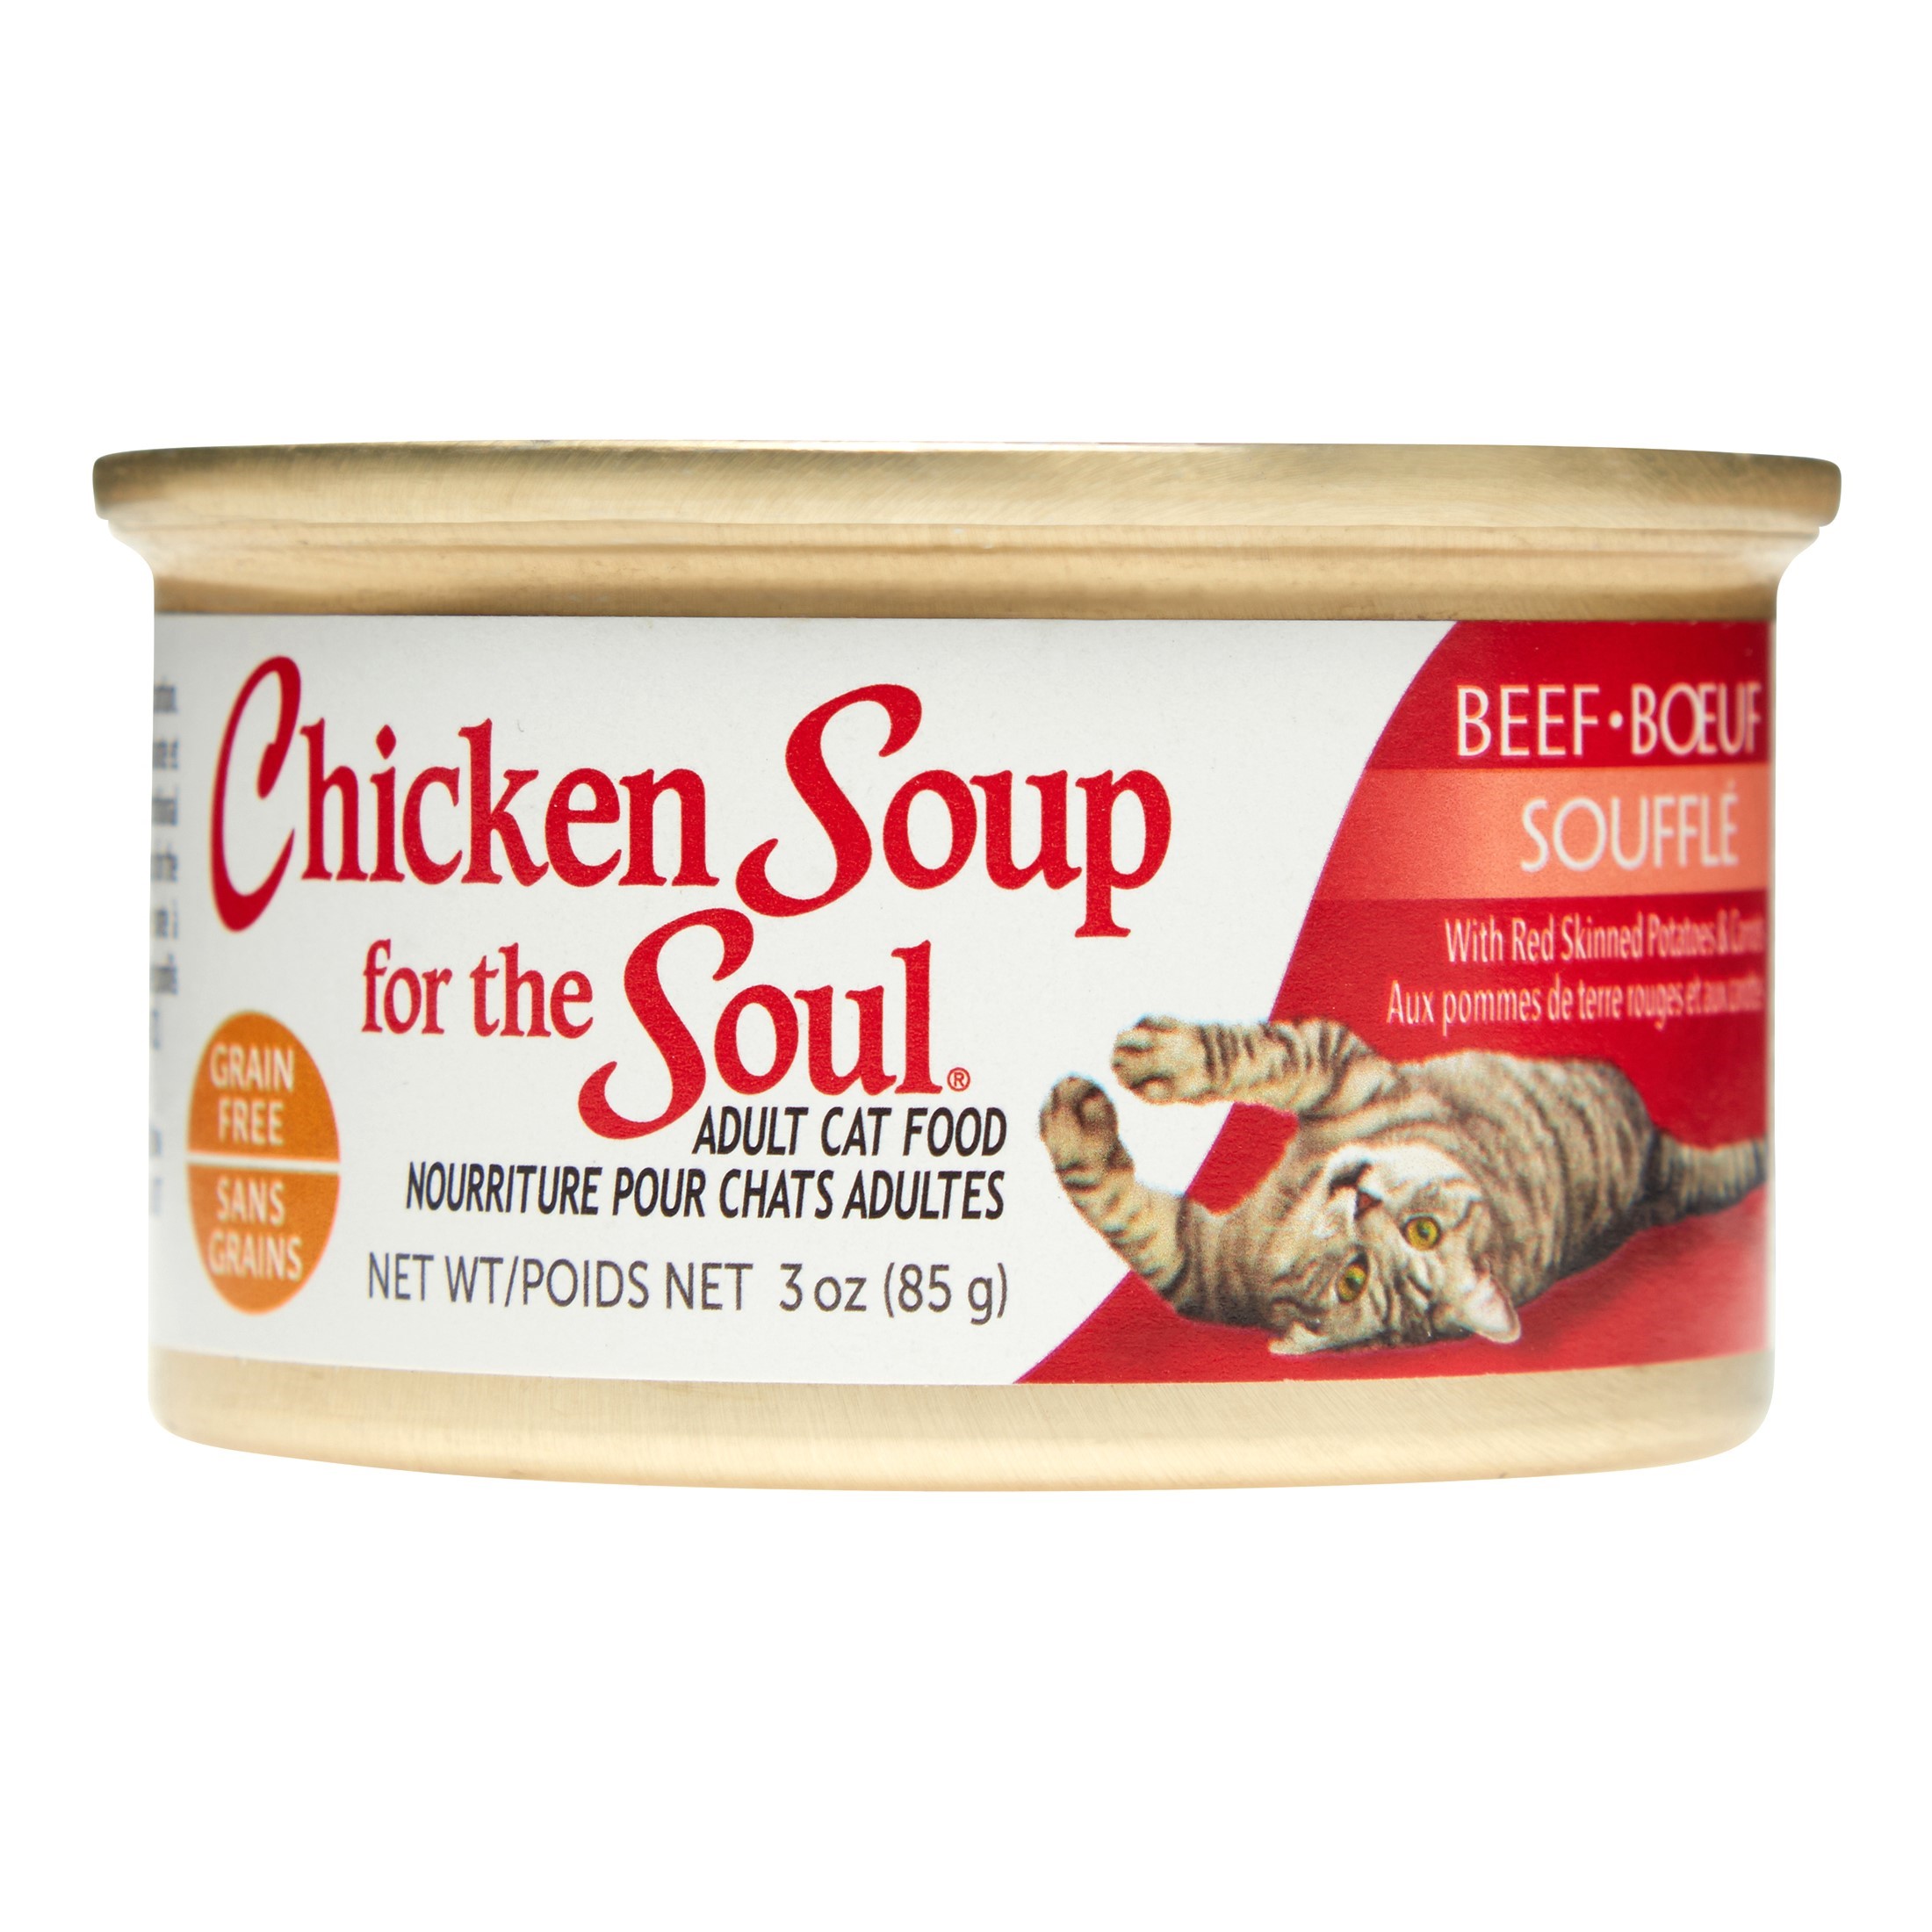 (24 Pack) Chicken Soup For The Soul Grain-Free Wet Cat Food, Beef Souffle, 3 oz - image 1 of 3